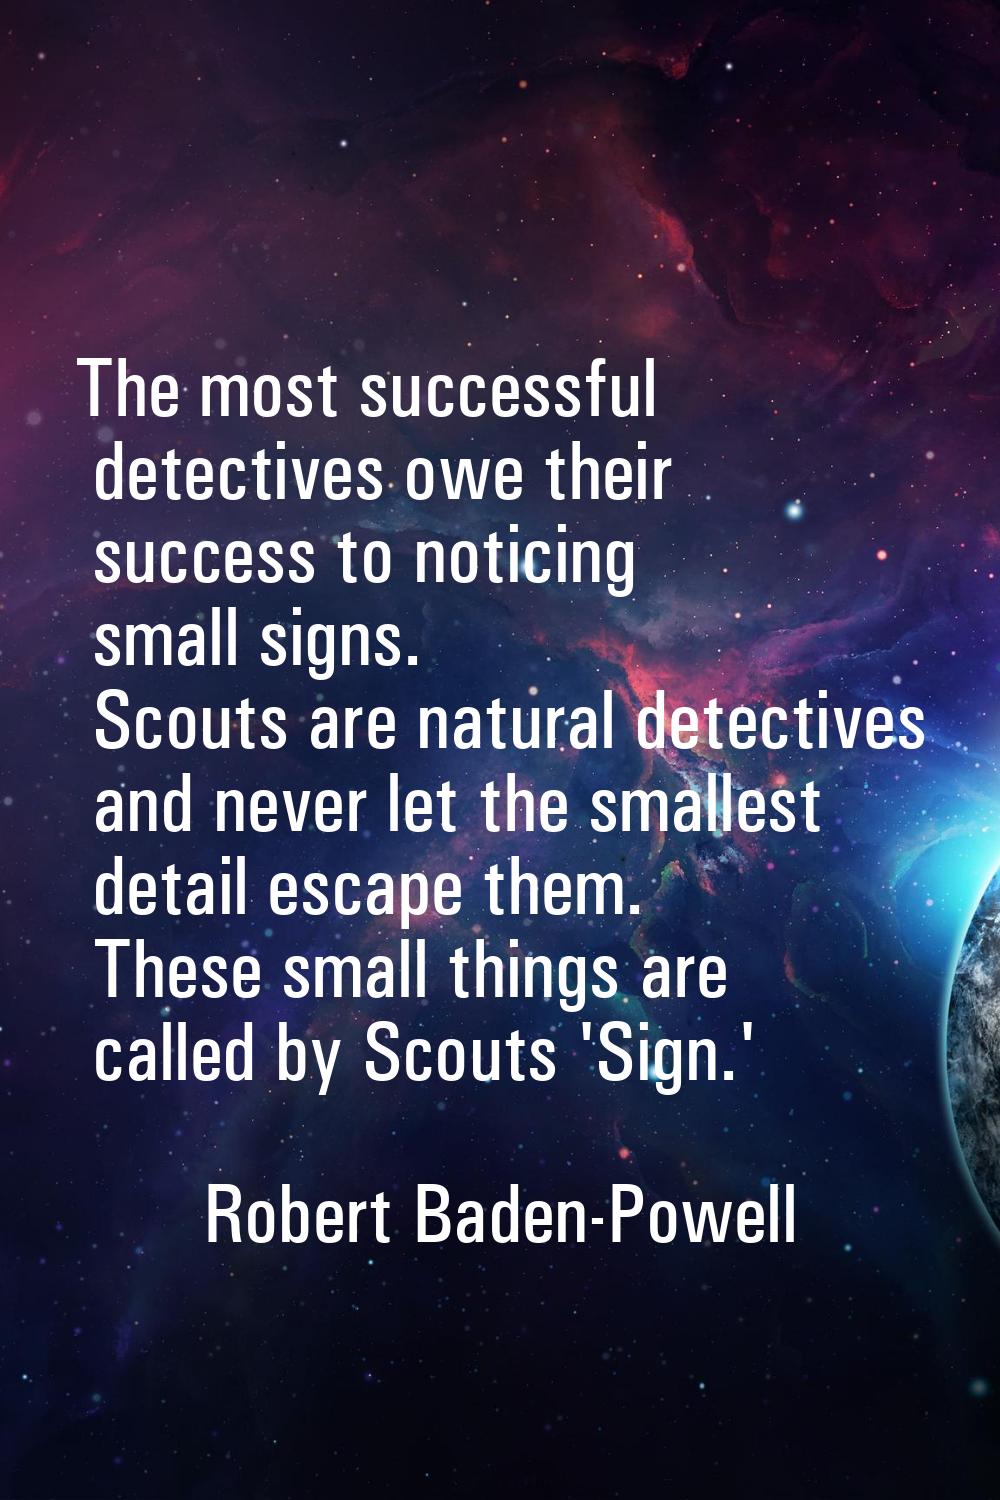 The most successful detectives owe their success to noticing small signs. Scouts are natural detect